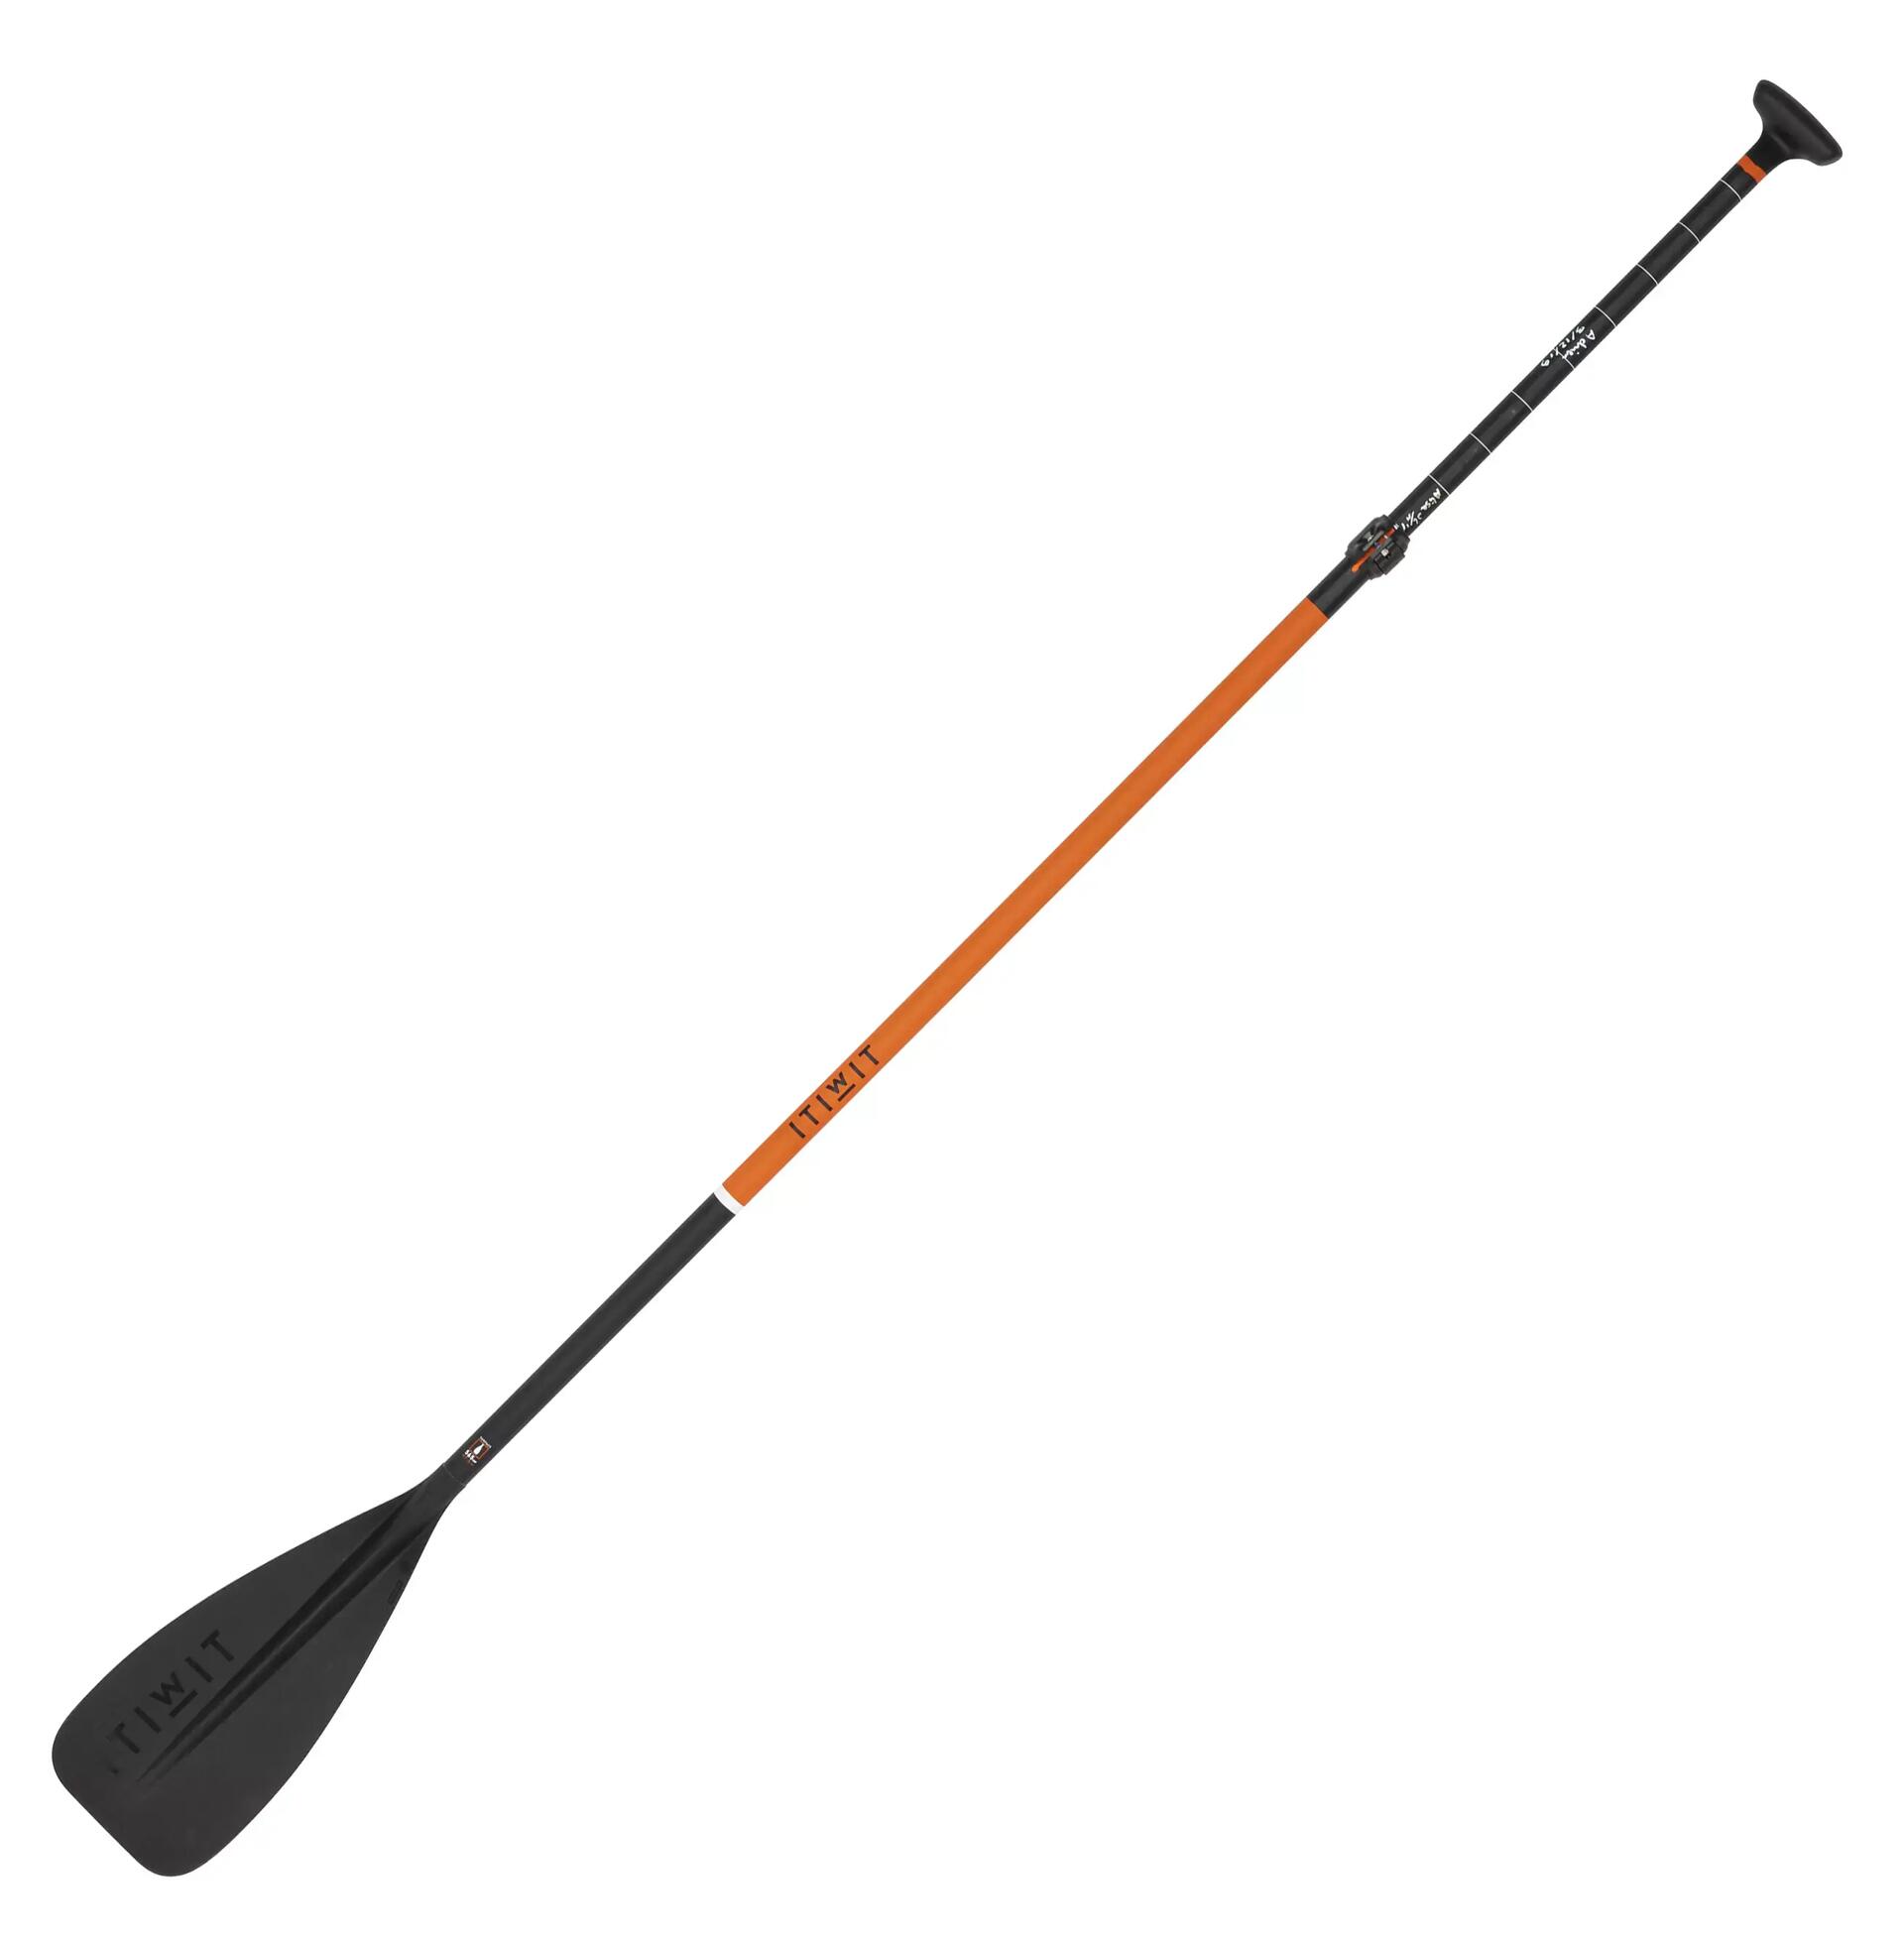 stand-up paddle itiwit 10 - red